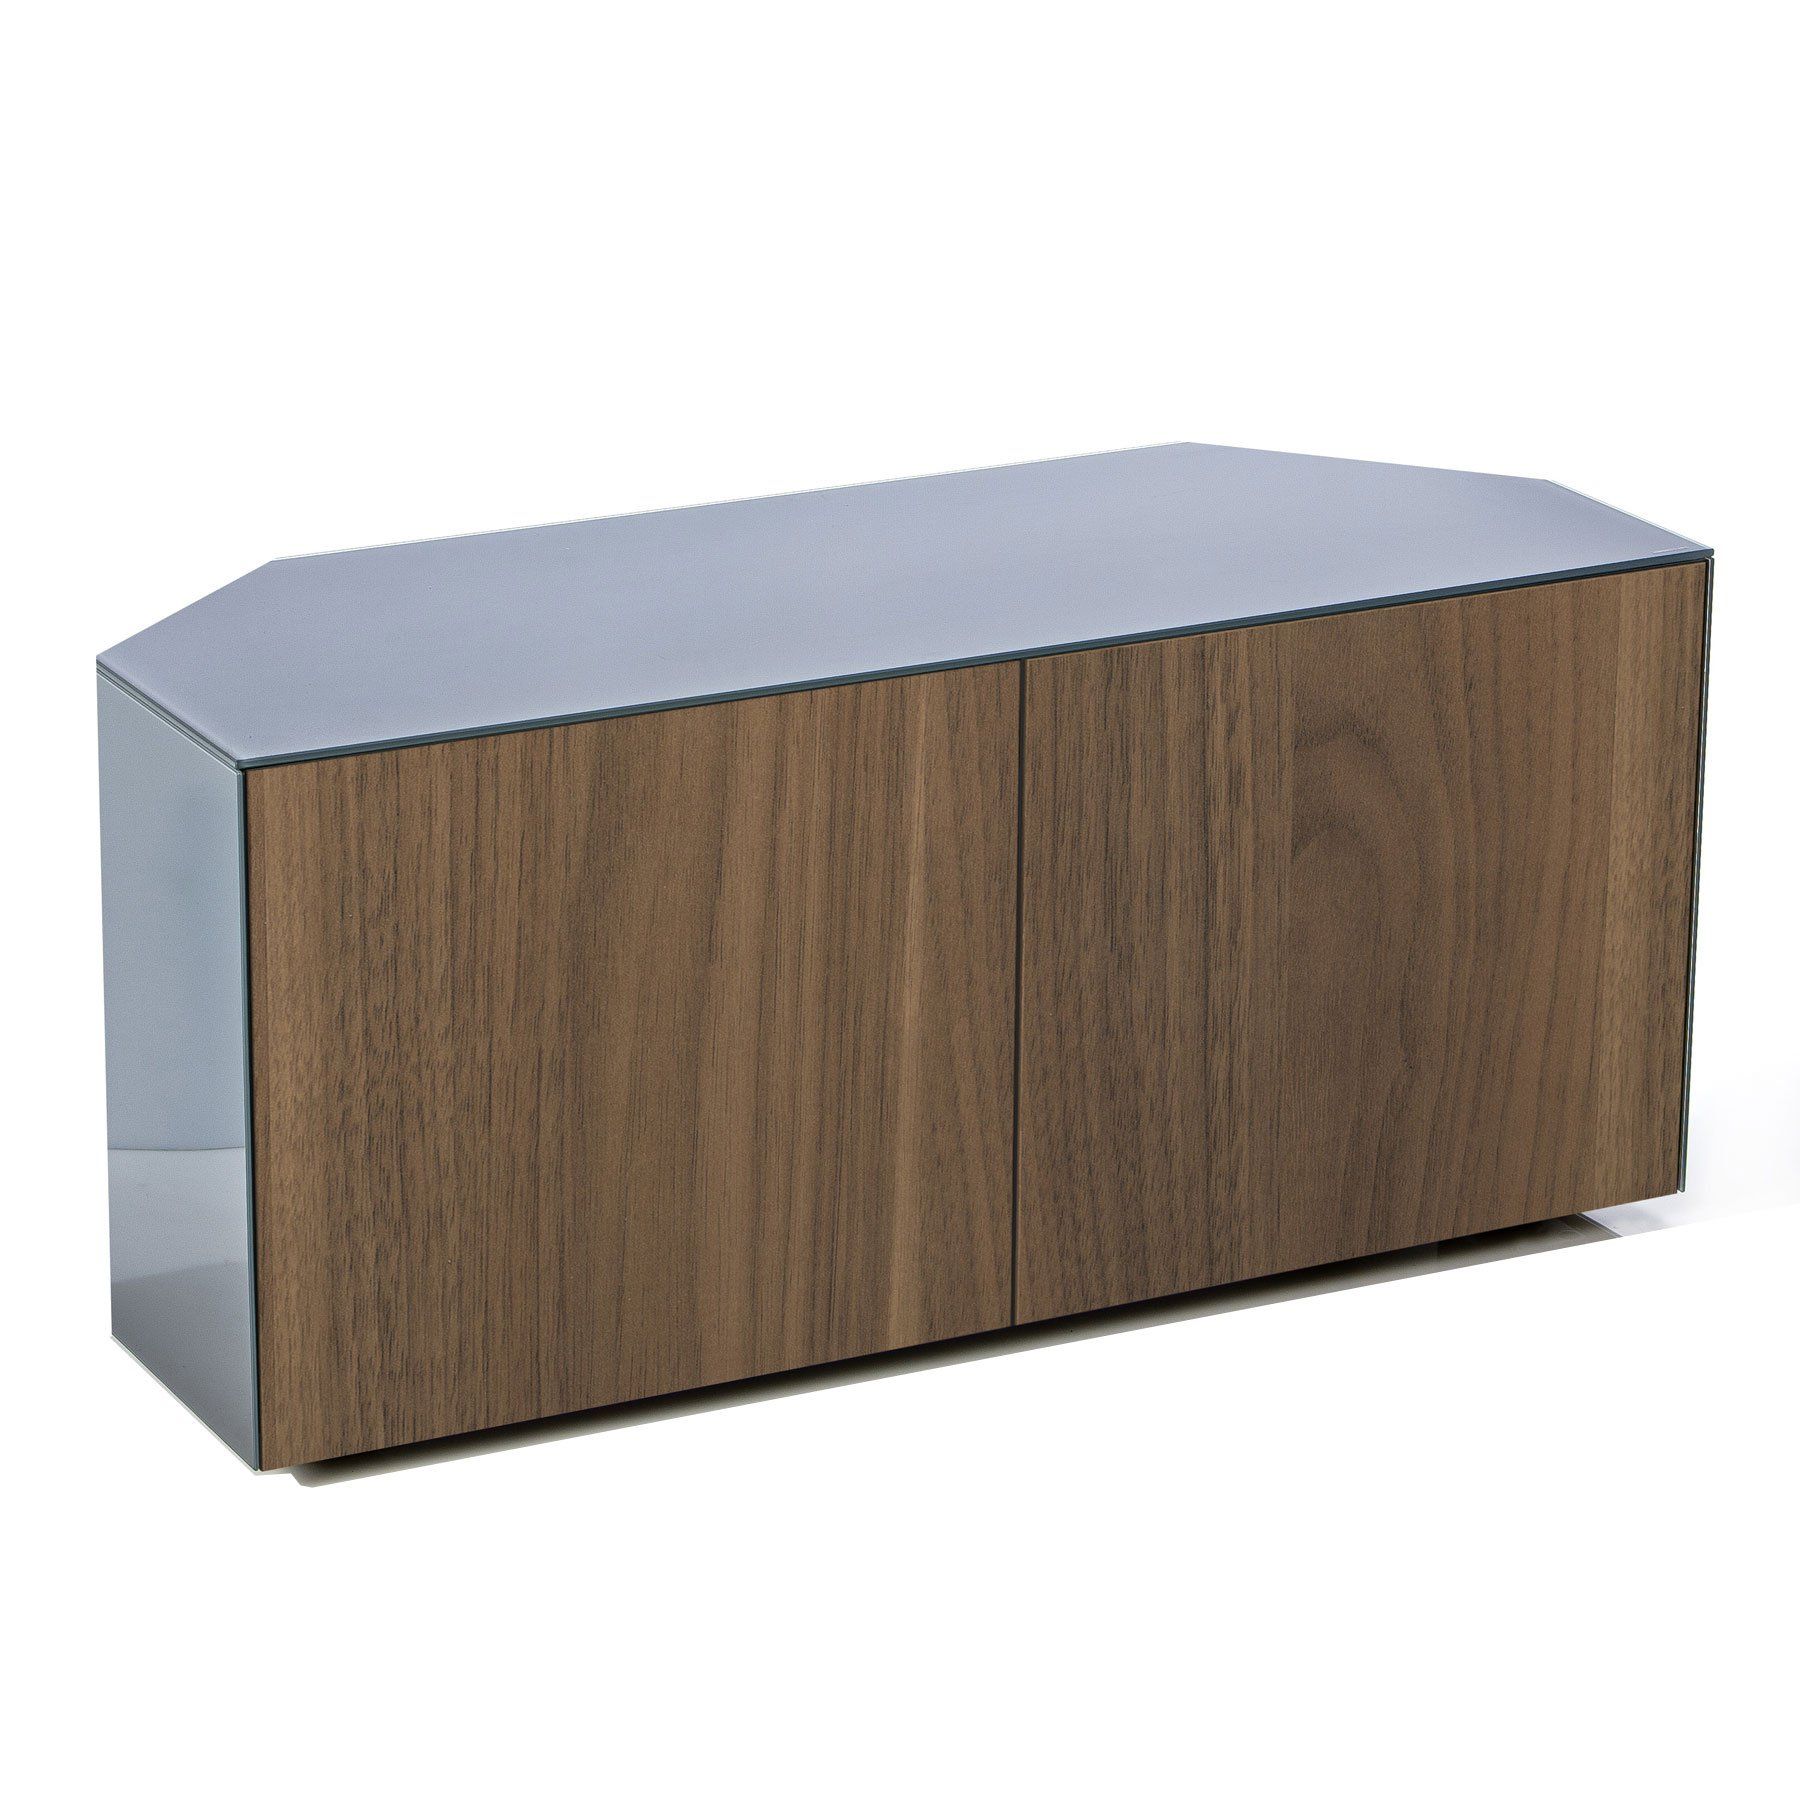 Invictus Grey And Walnut Corner Tv Stand For Up To 55" Tvs With Grey Corner Tv Stands (View 11 of 15)